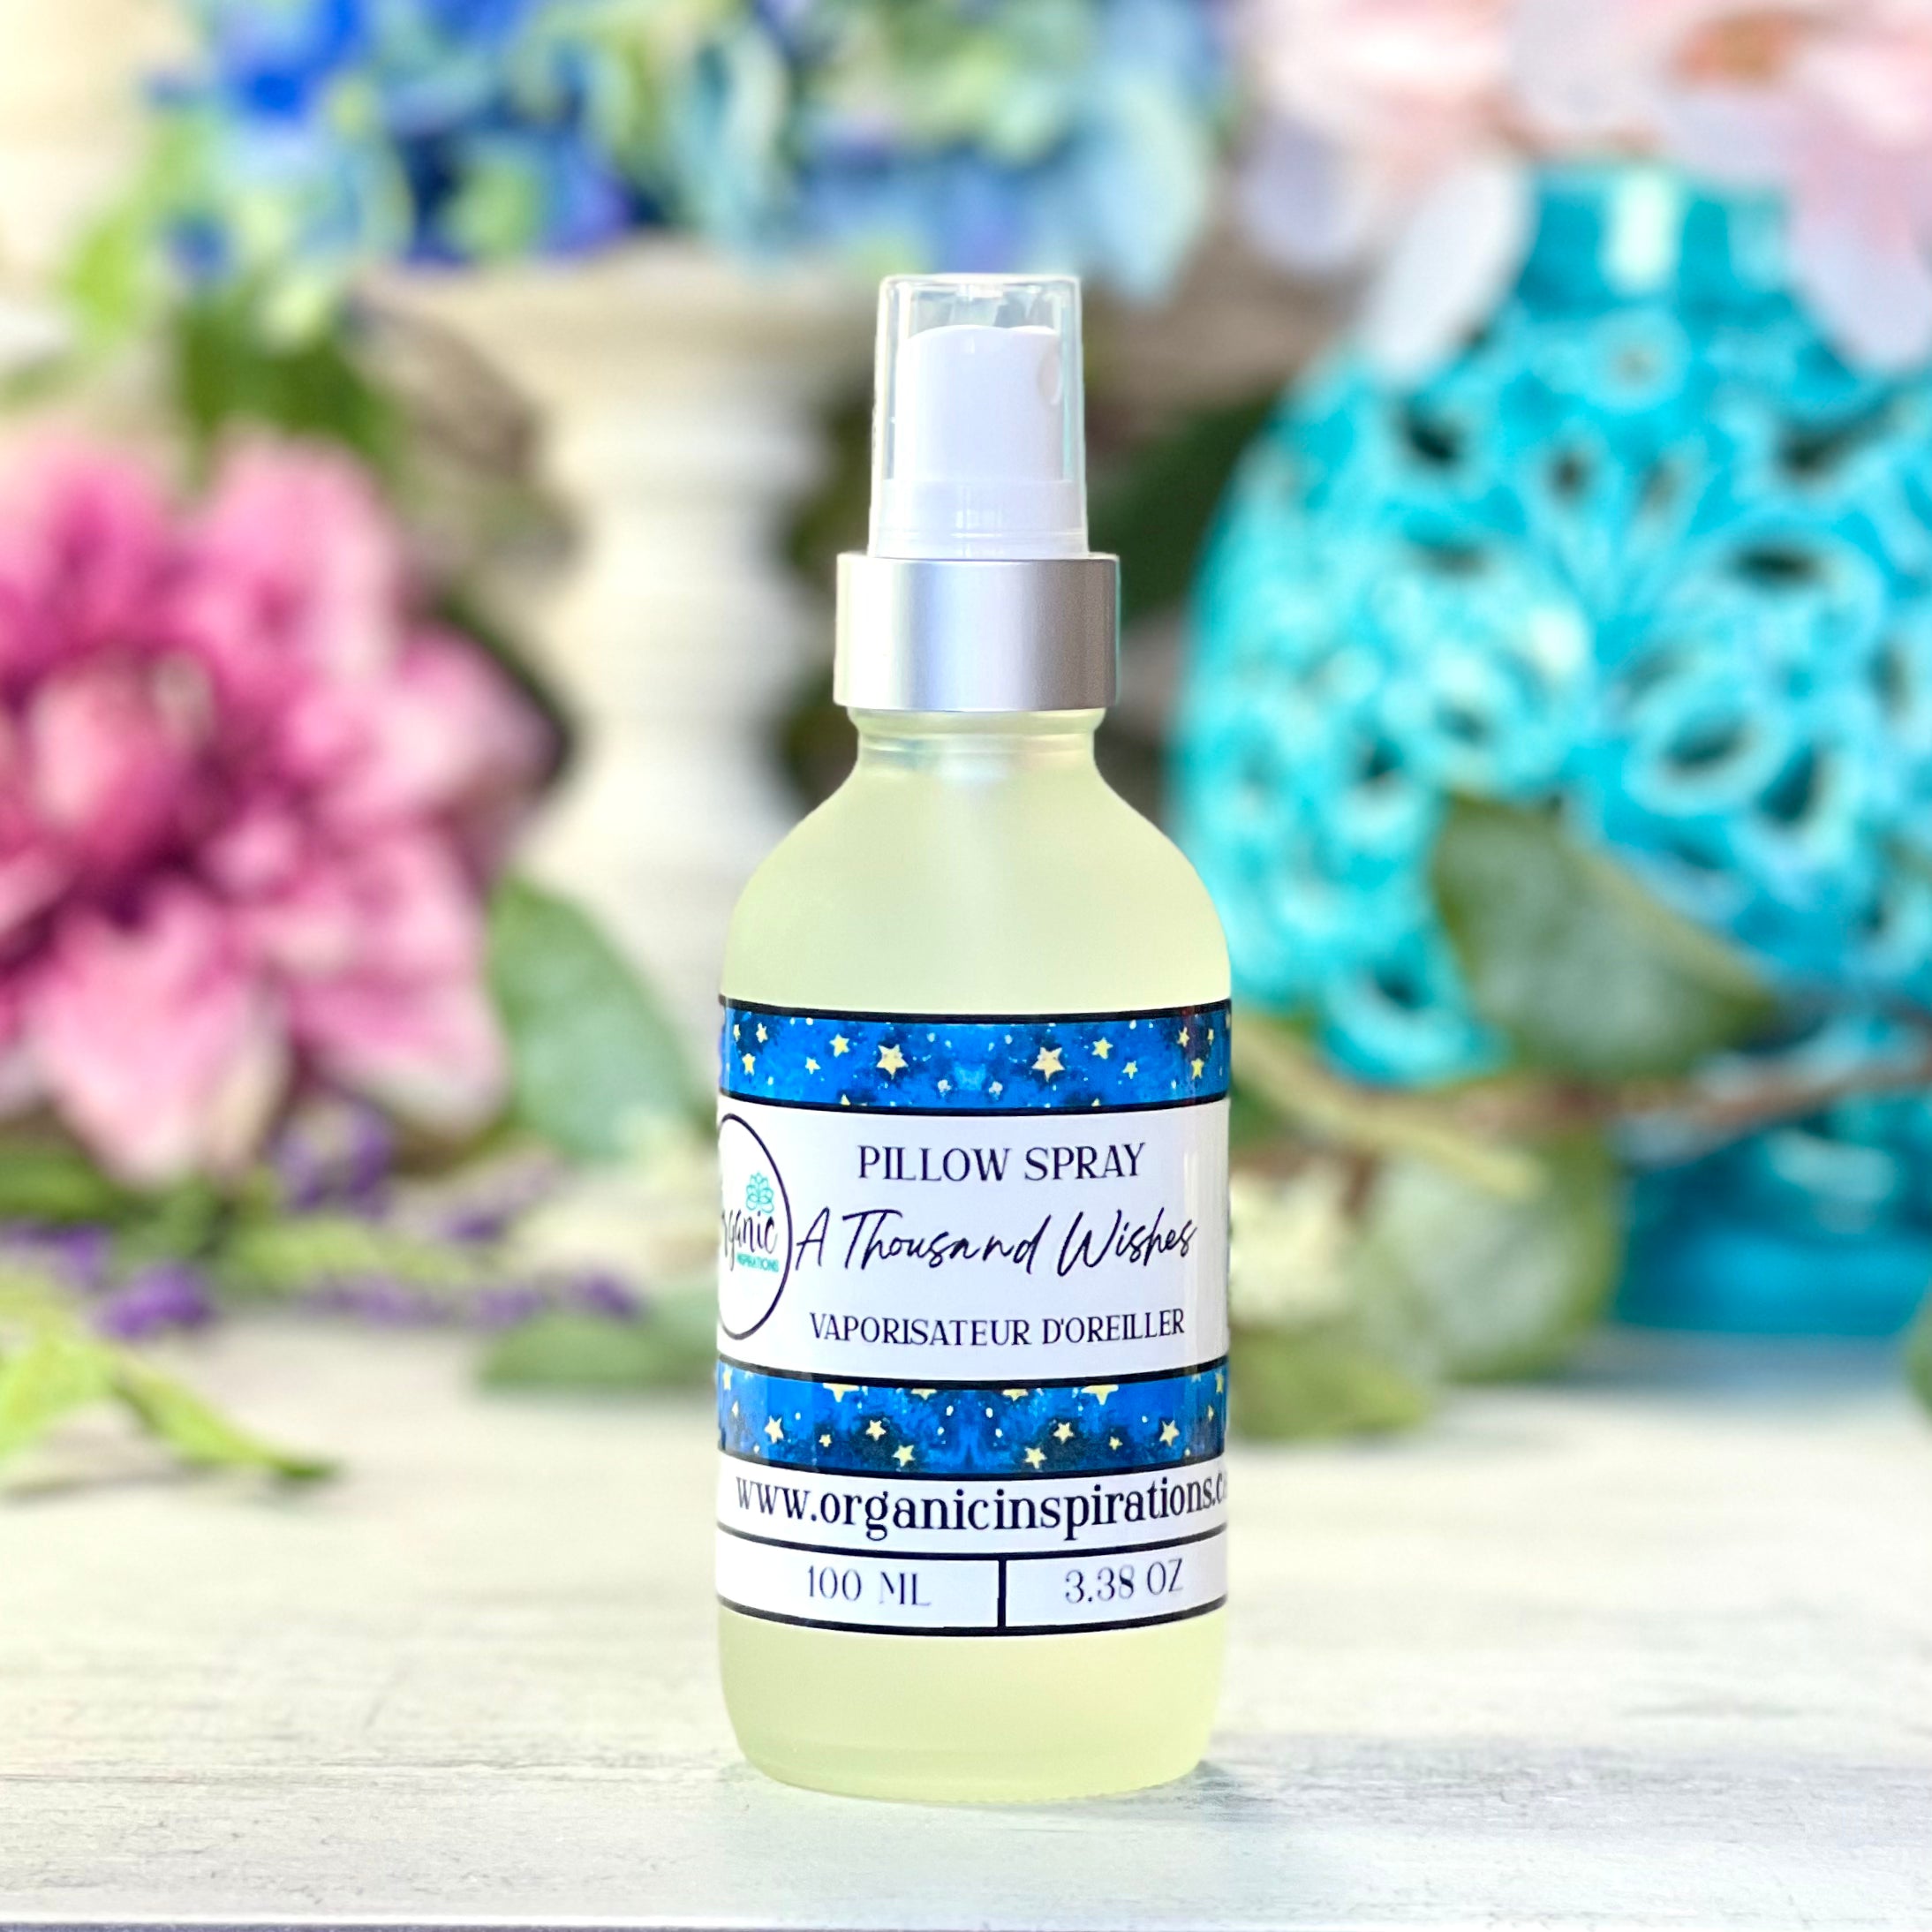 A Thousand Wishes Pillow Spray Organic inspirations 